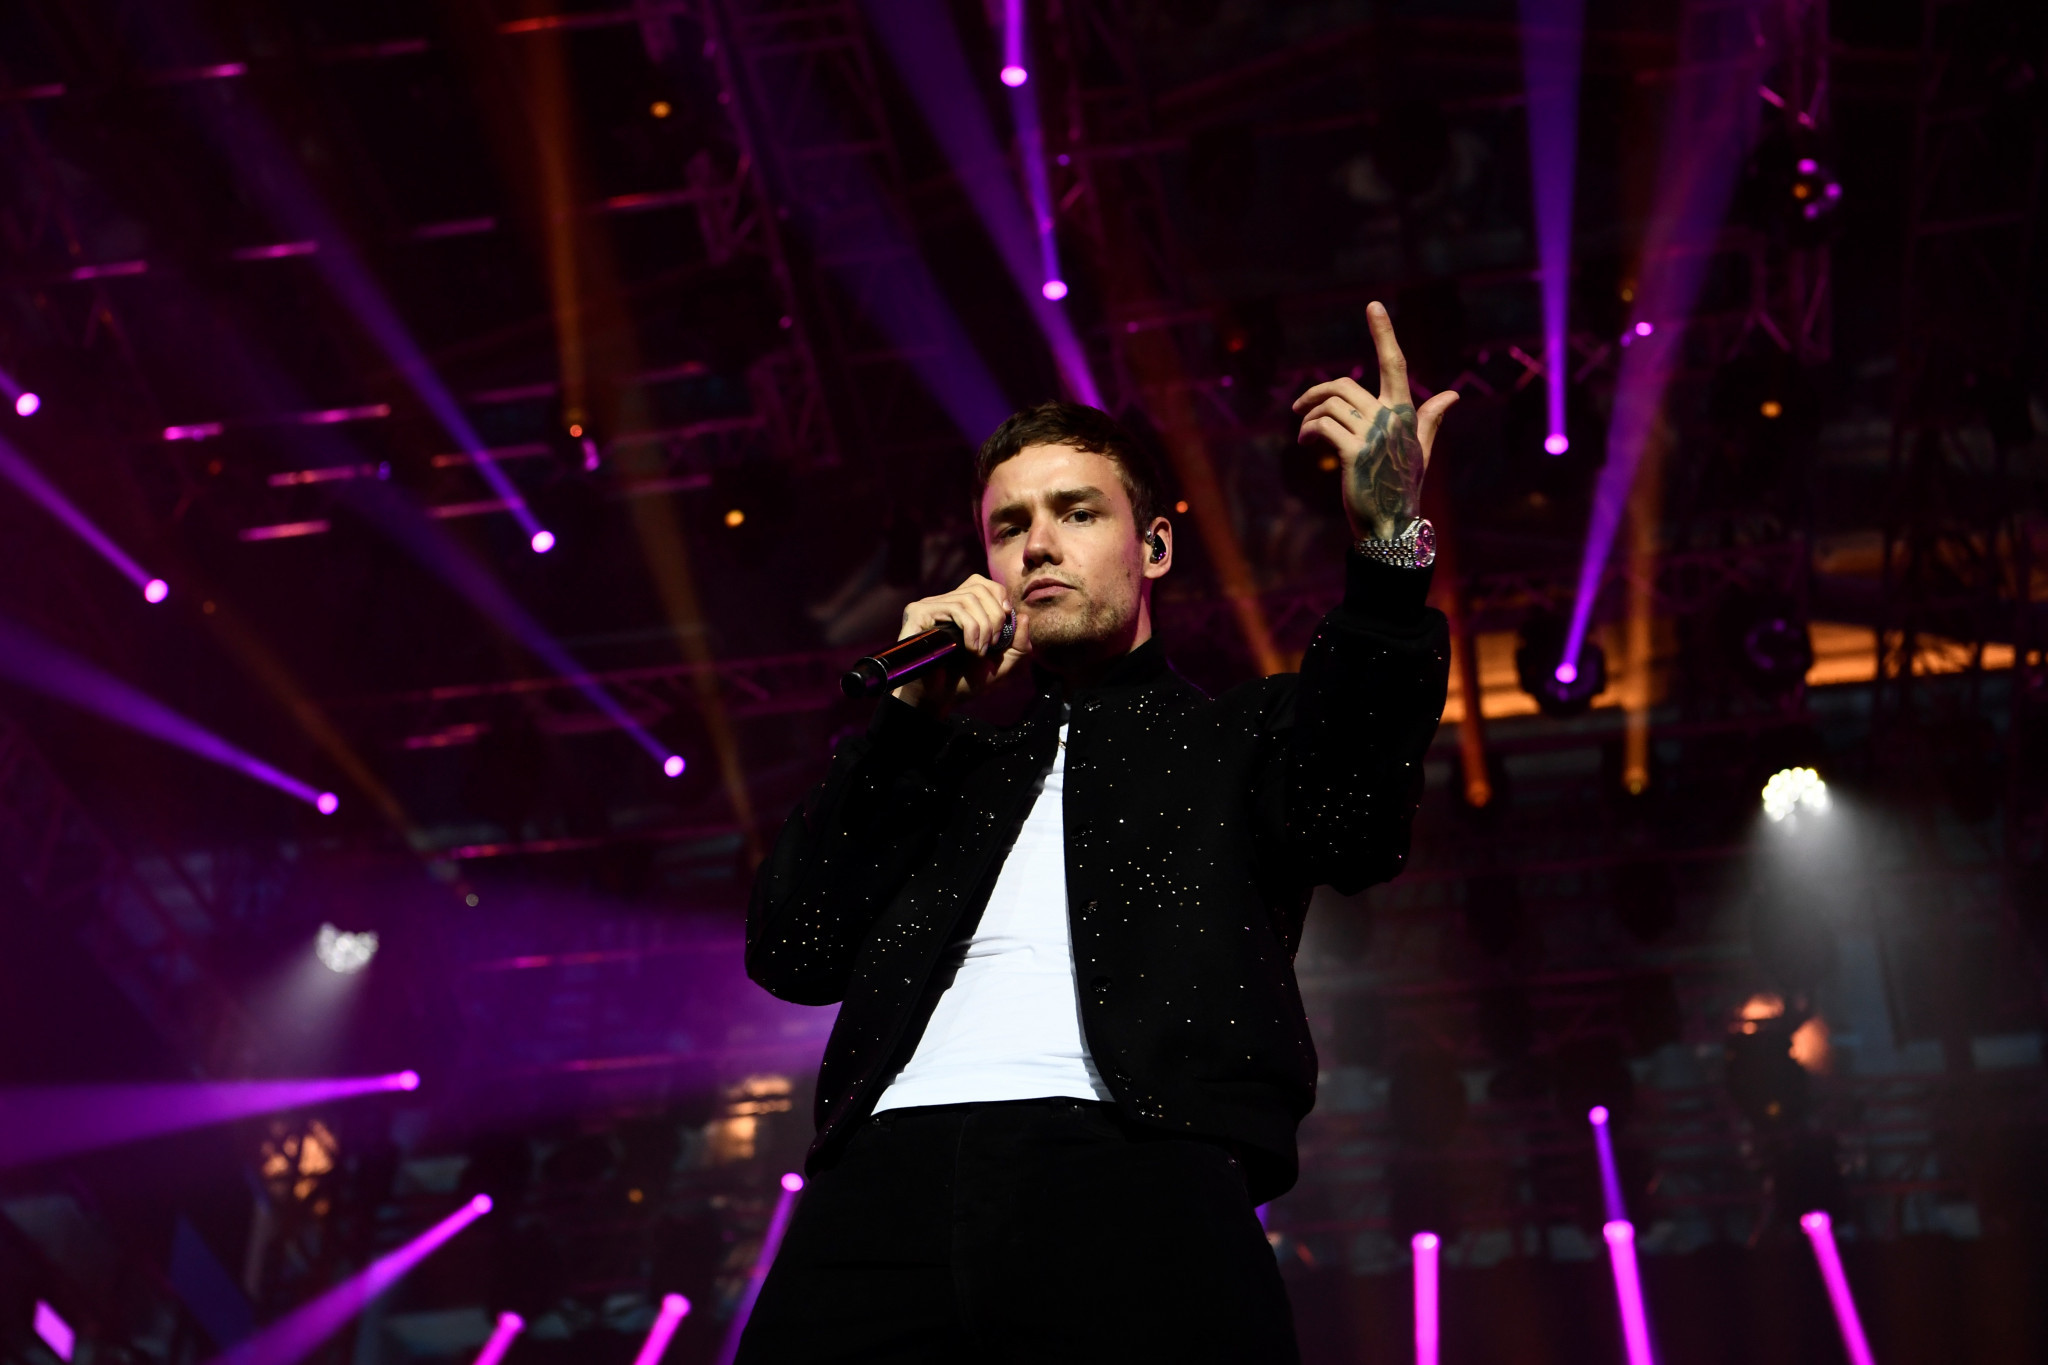 British singer Liam Payne was among the musical acts to perform at the concert ©Getty Images